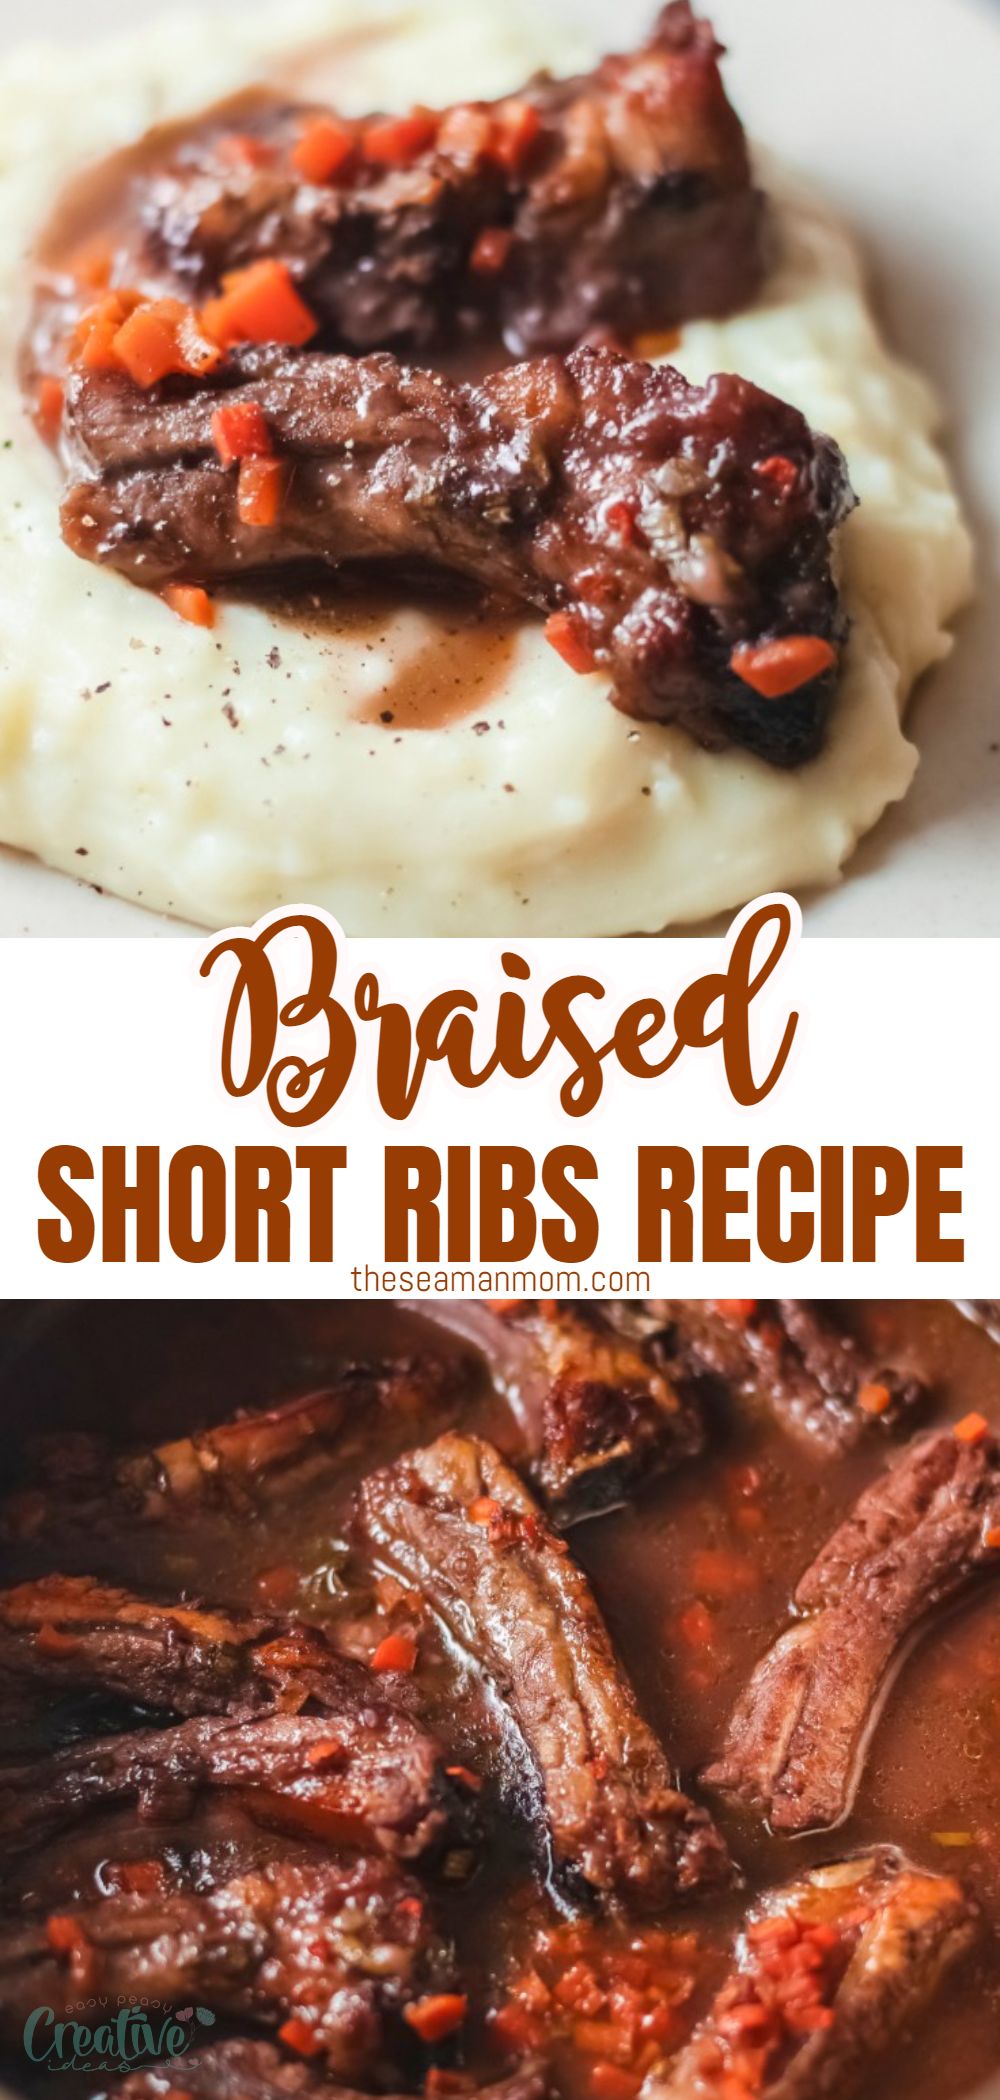 This braised short ribs recipe is incredibly delicious! Tender and with big pieces of meat hung into the bone, these braised ribs are slowly cooked in the oven with a wine sauce that’s slightly sweet and incredibly flavorful. via @petroneagu